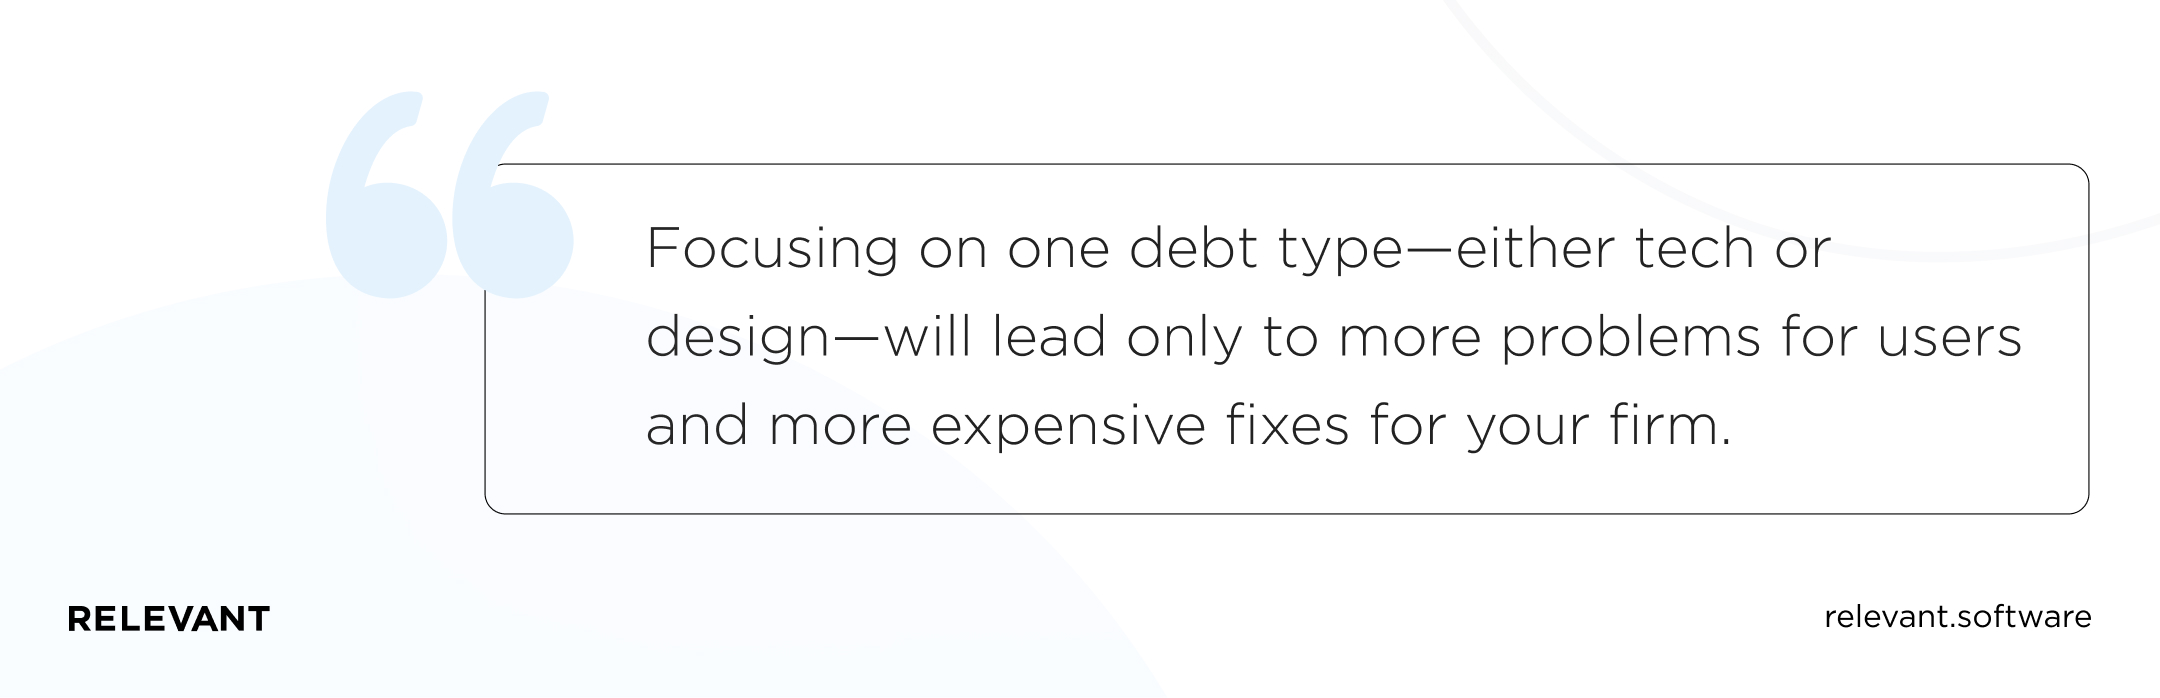 Focusing on one debt type—either tech or design—will lead only to more problems for users and more expensive fixes for your firm.